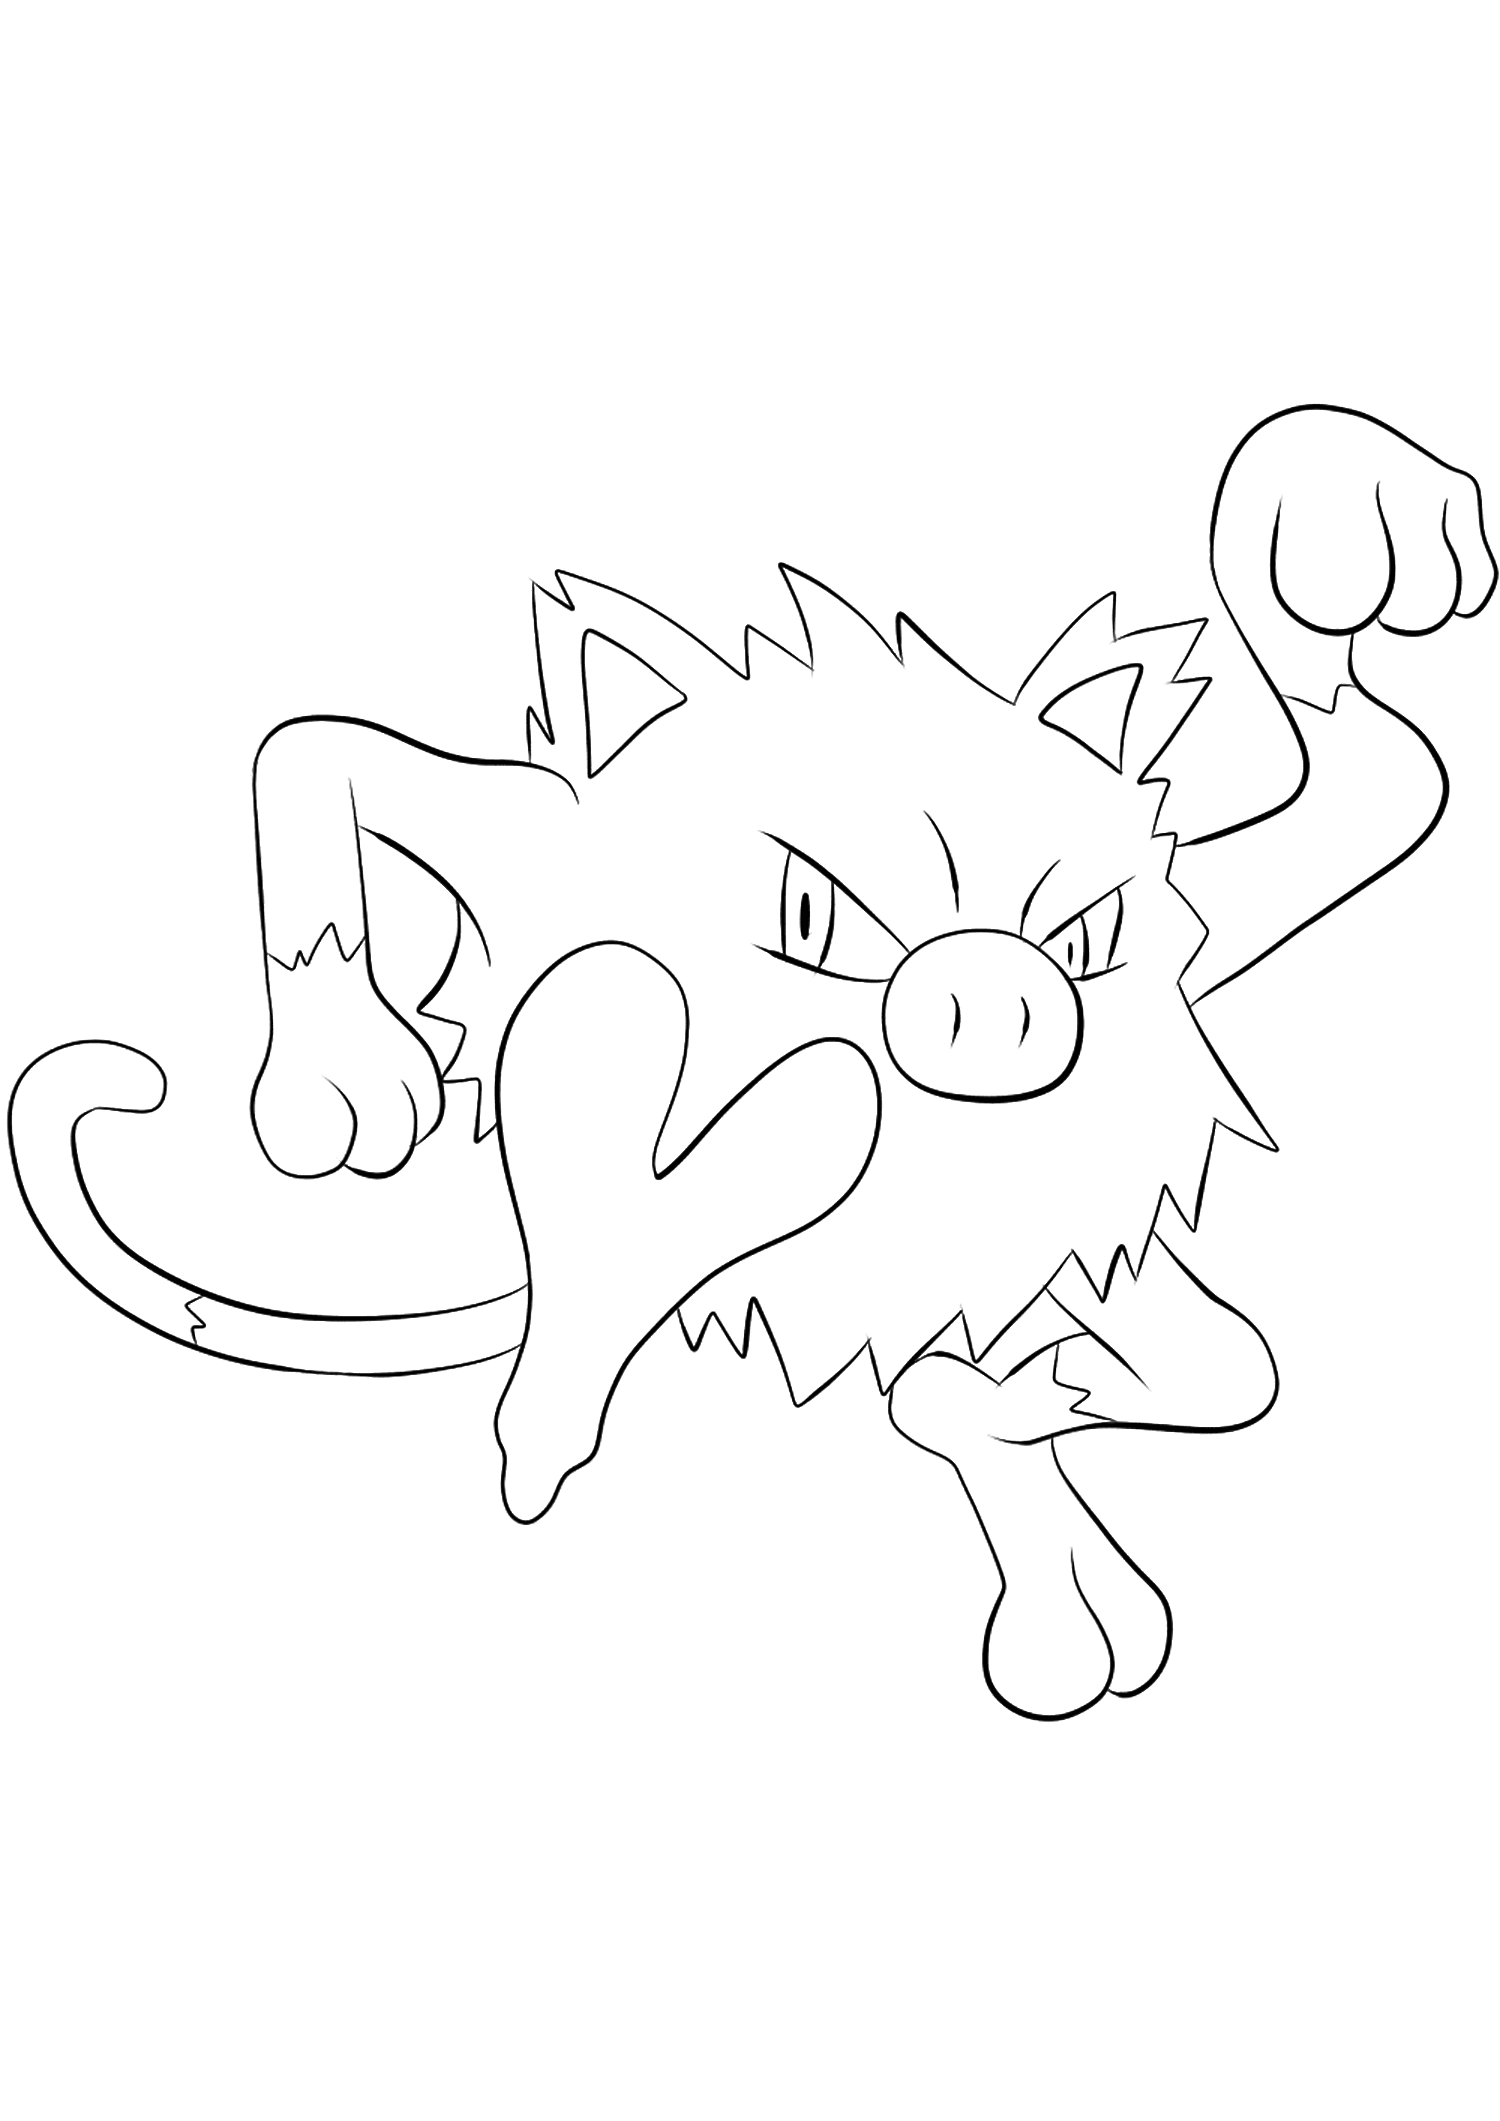 Mankey (No.56). Mankey Coloring page, Generation I Pokemon of type FightingOriginal image credit: Pokemon linearts by Lilly Gerbil on Deviantart.Permission:  All rights reserved © Pokemon company and Ken Sugimori.